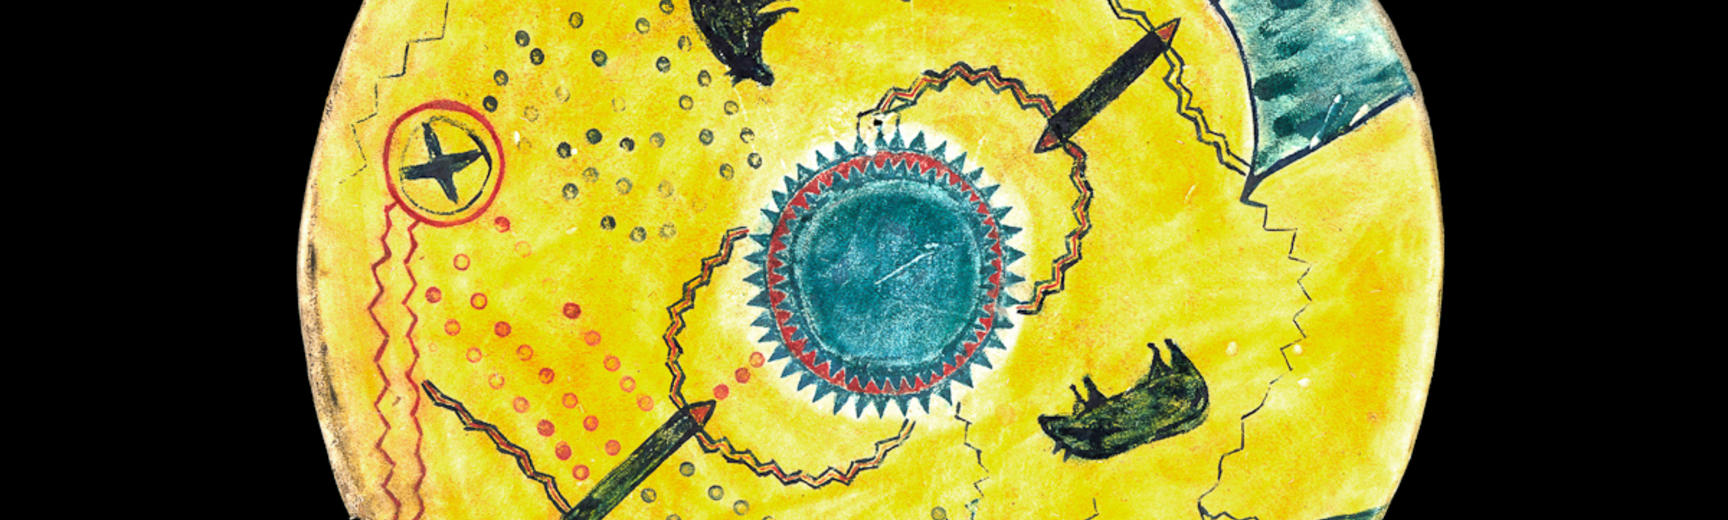 Navajo shield painted yellow with a central design of a green and red circle with triangles around the edge.  There are two bearlike animals painted in blue near the centre.